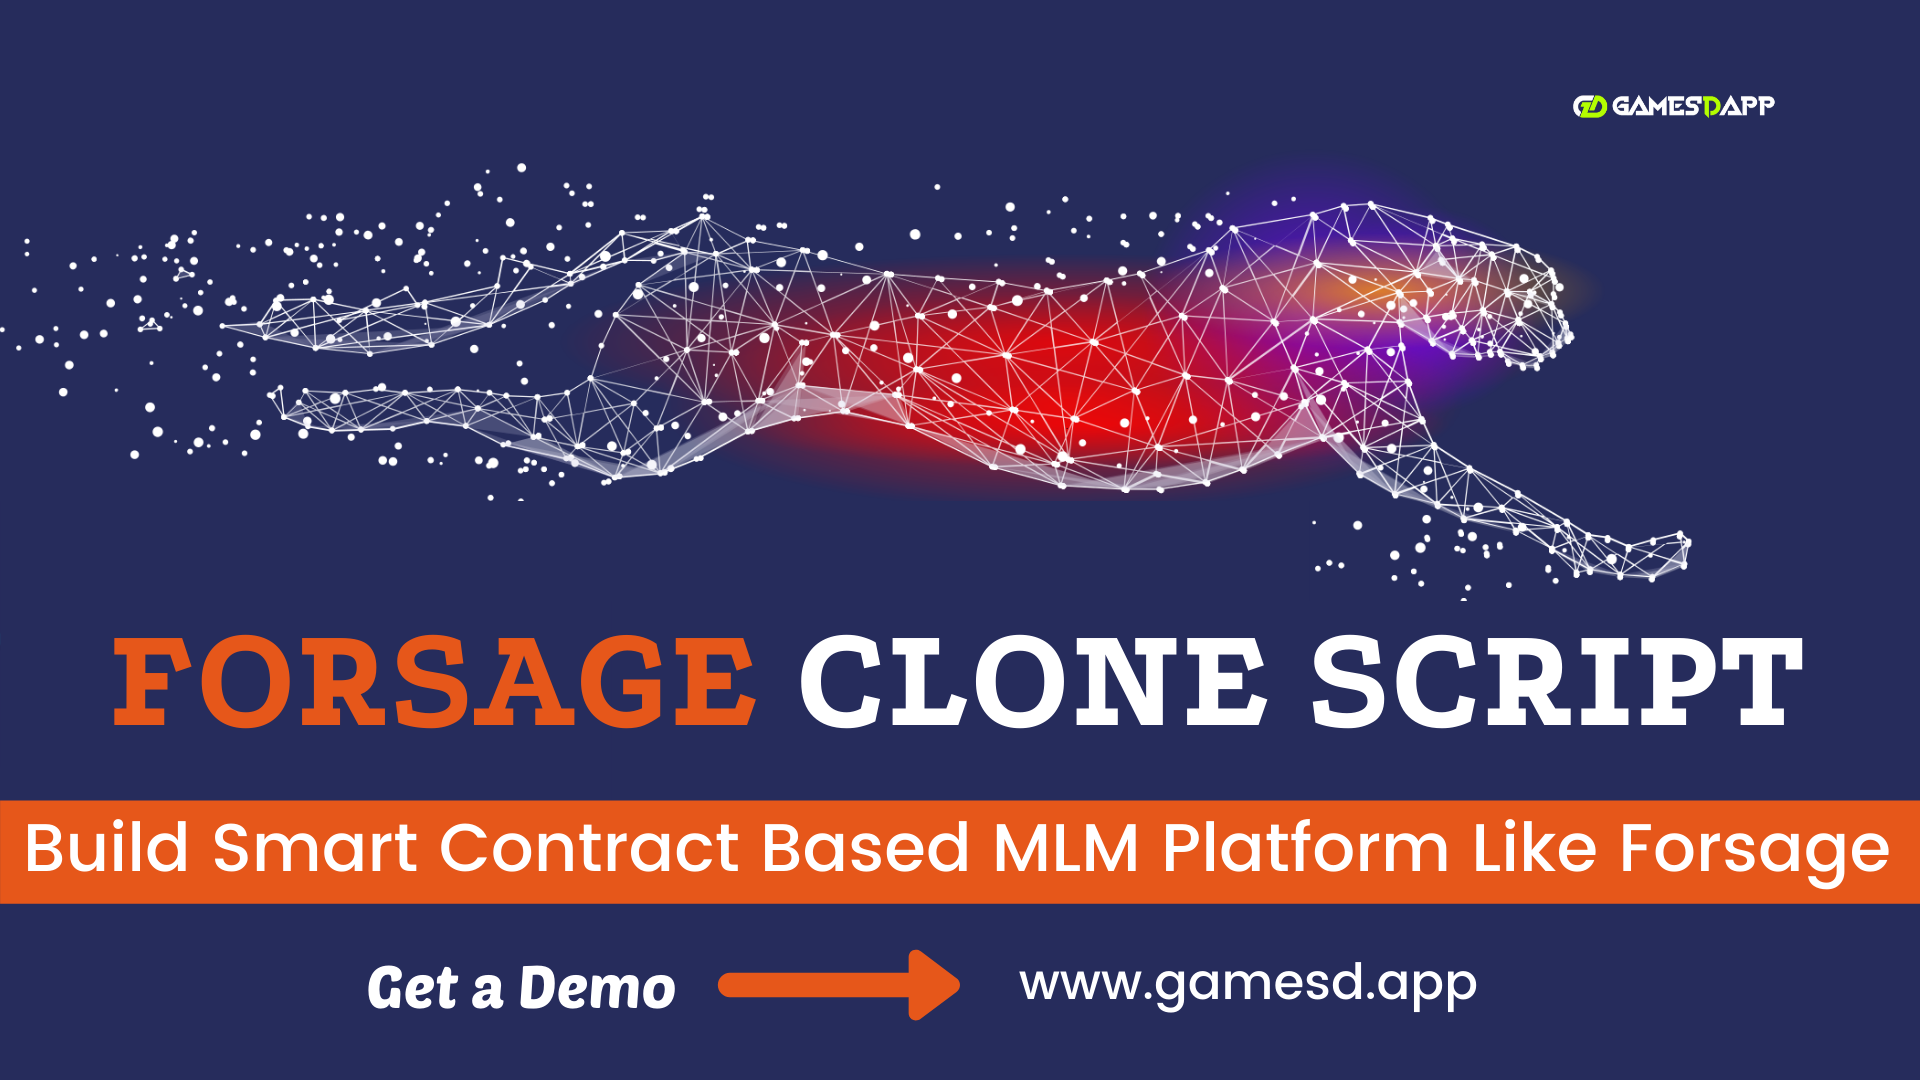 Forsage Clone Script - To Build Smart Contract Based MLM Platform Like Forsage